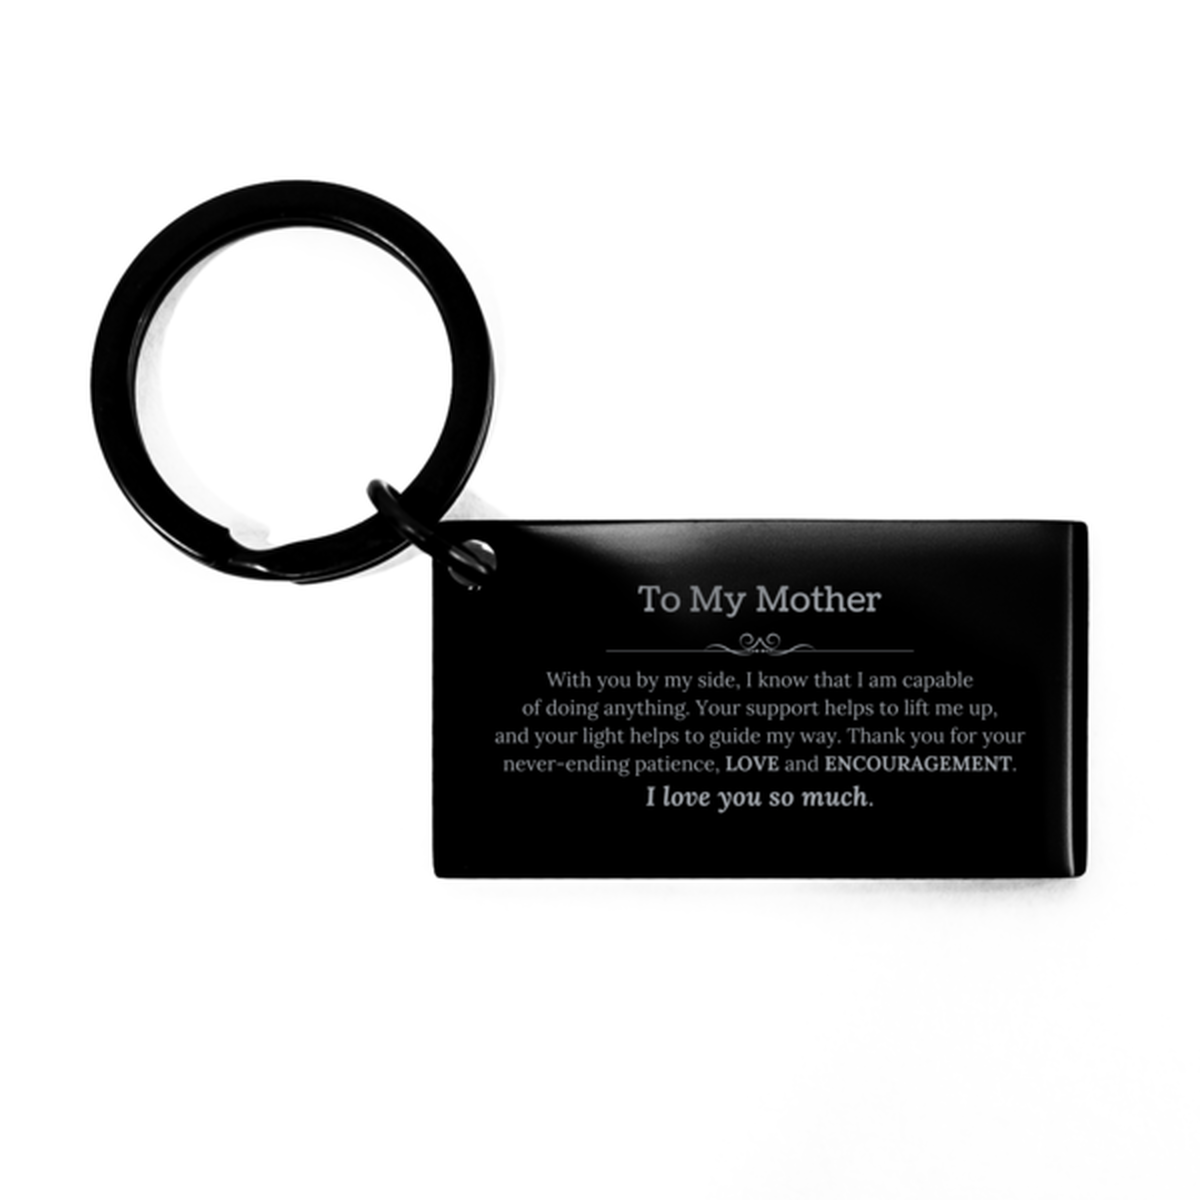 Appreciation Mother Keychain Gifts, To My Mother Birthday Christmas Wedding Keepsake Gifts for Mother With you by my side, I know that I am capable of doing anything. I love you so much